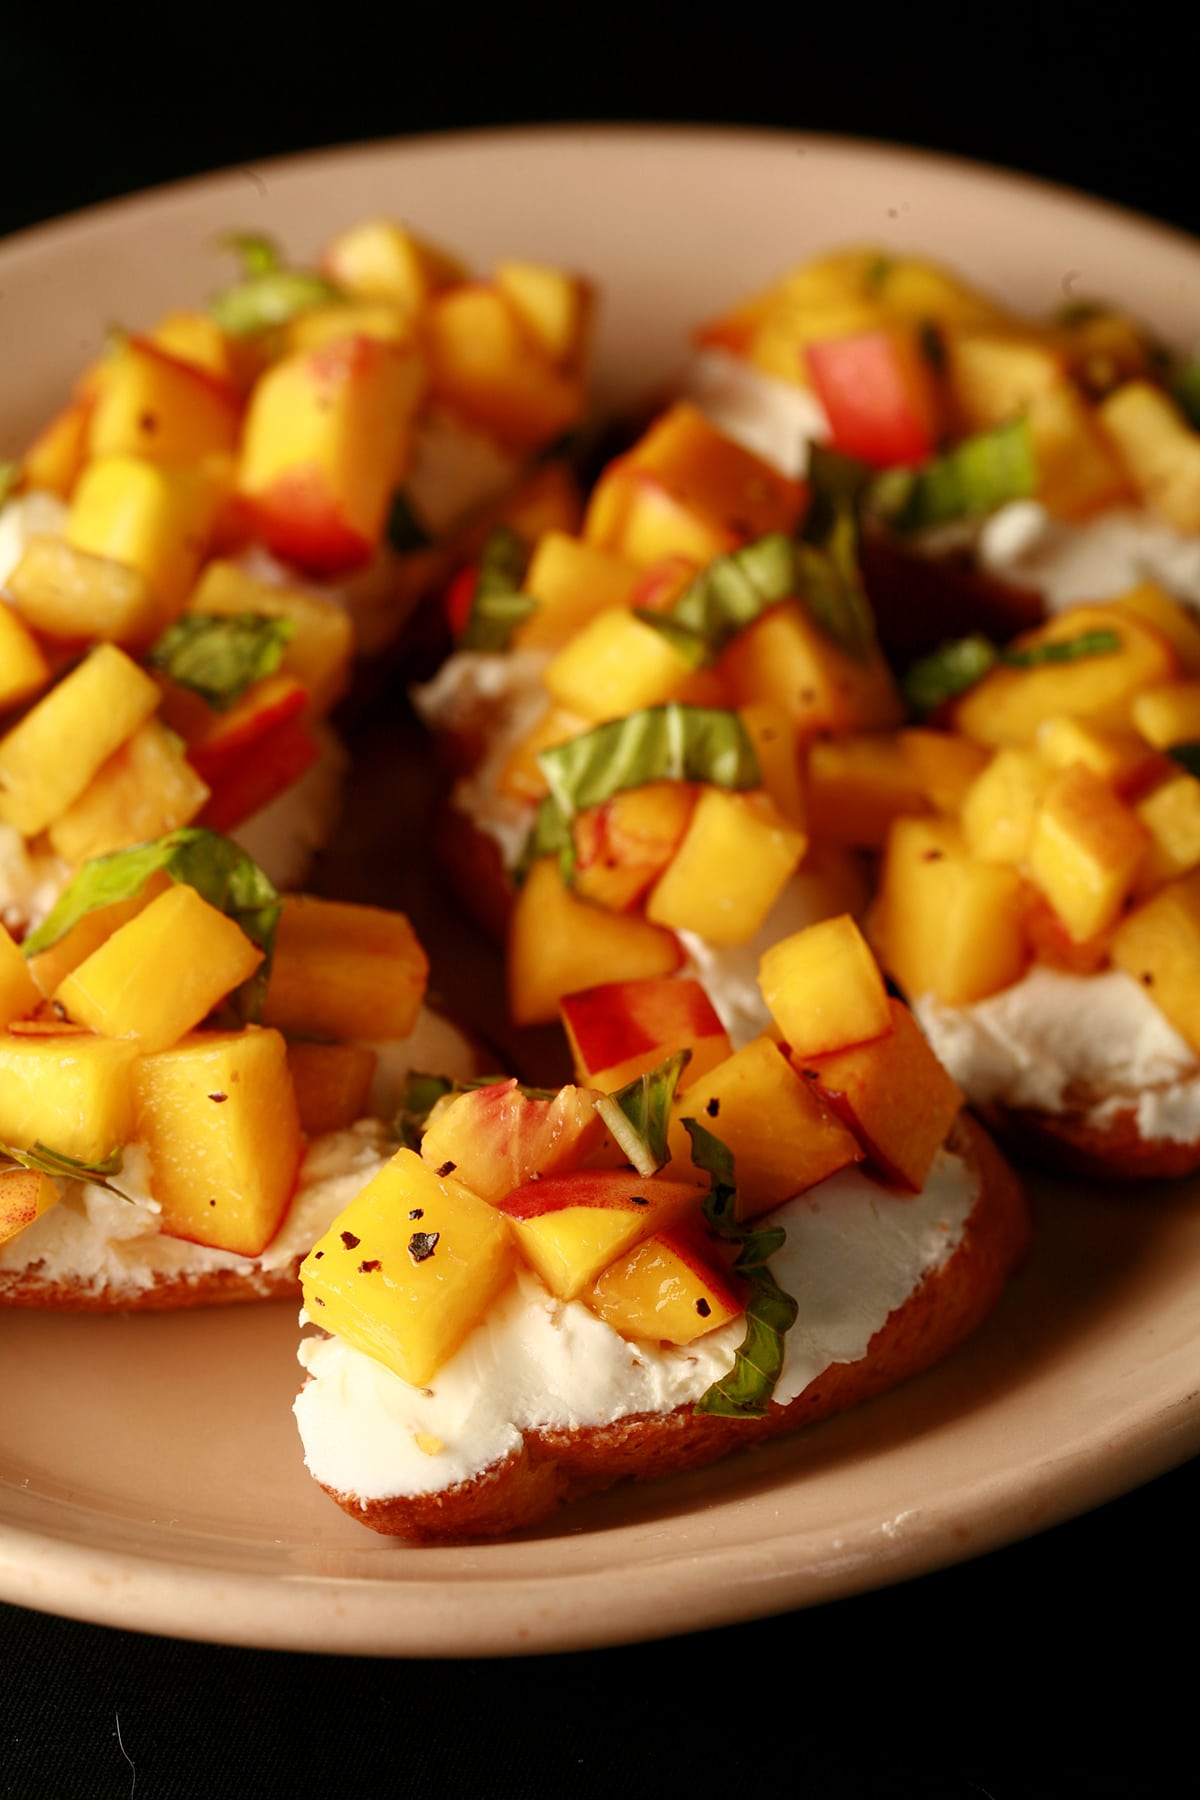 An oval plate with several servings of balsamic peach bruschetta - toasted baguette slices with goat cheese, chopped peaches, and ribbons of fresh basil.